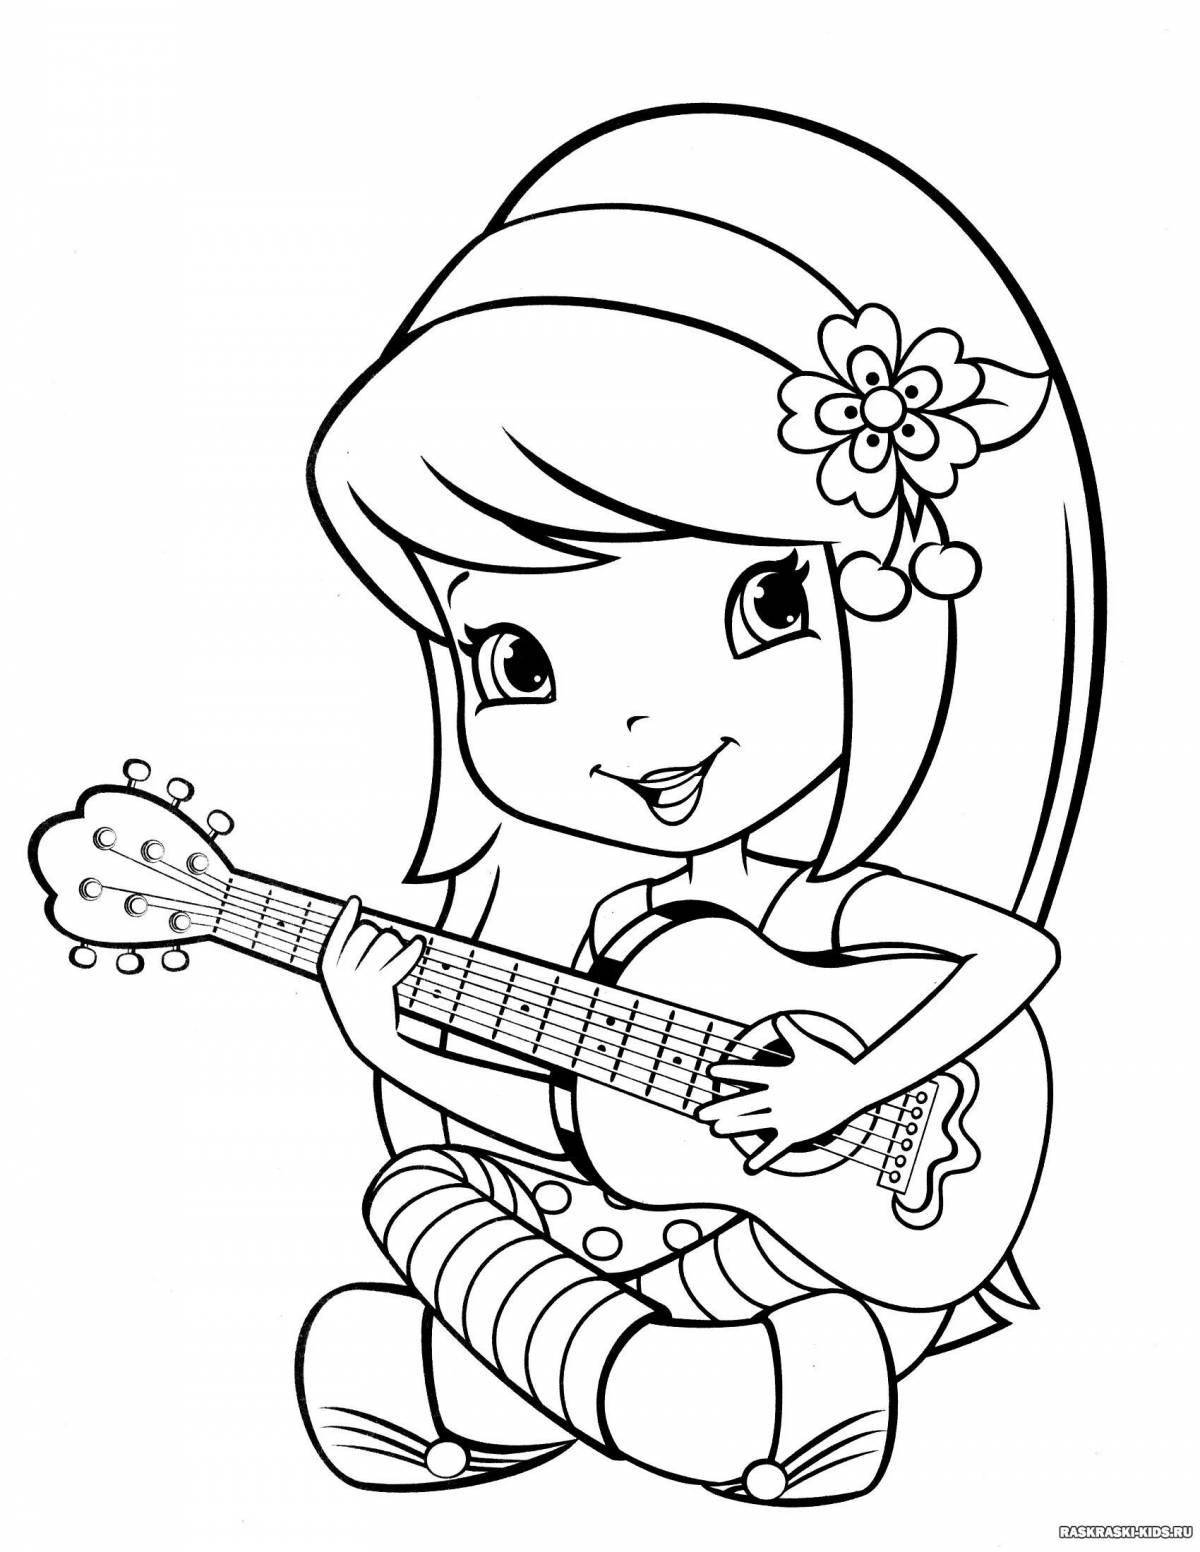 Glowing coloring book for girls